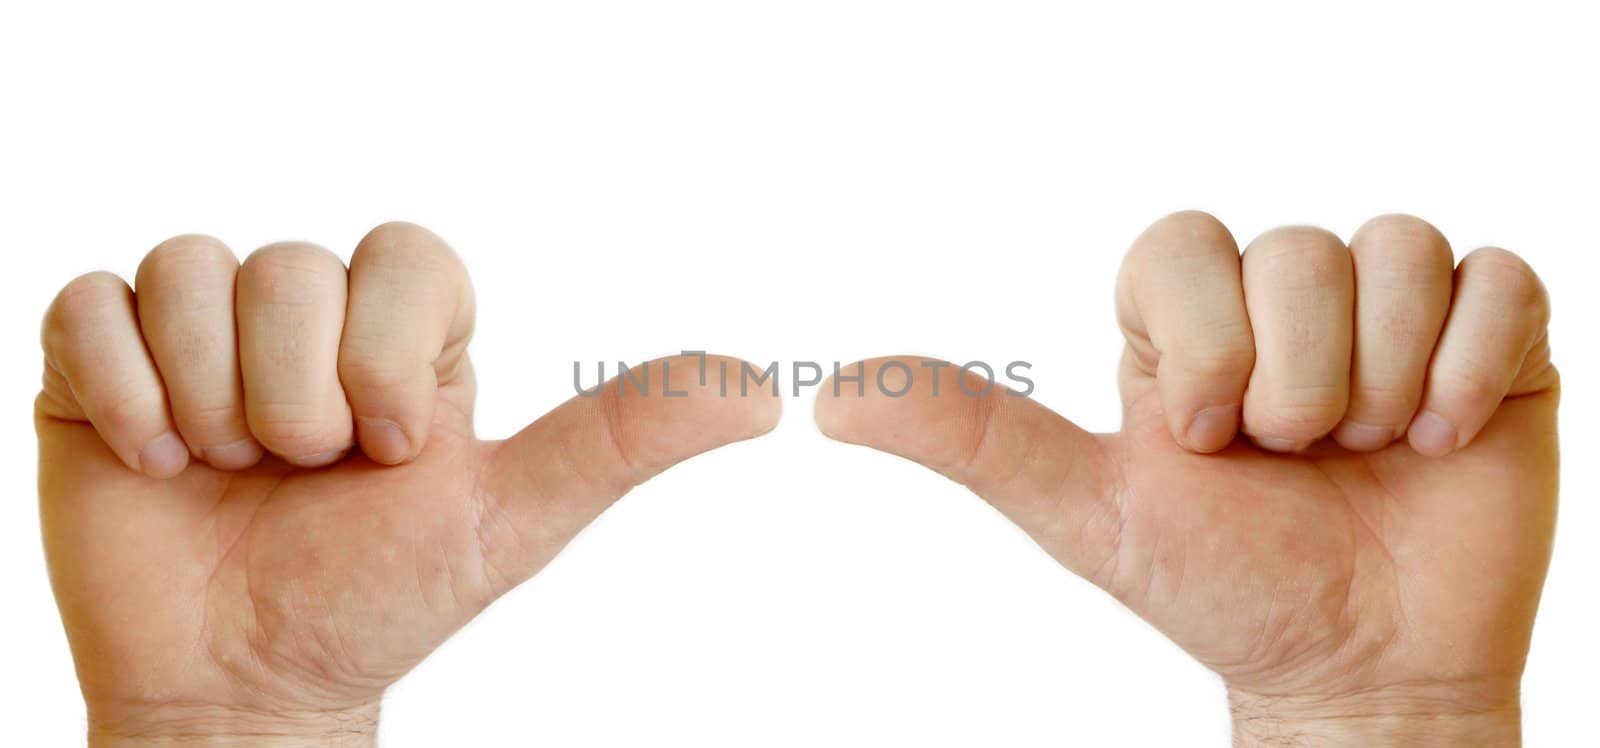 Two hands showing each other by simply